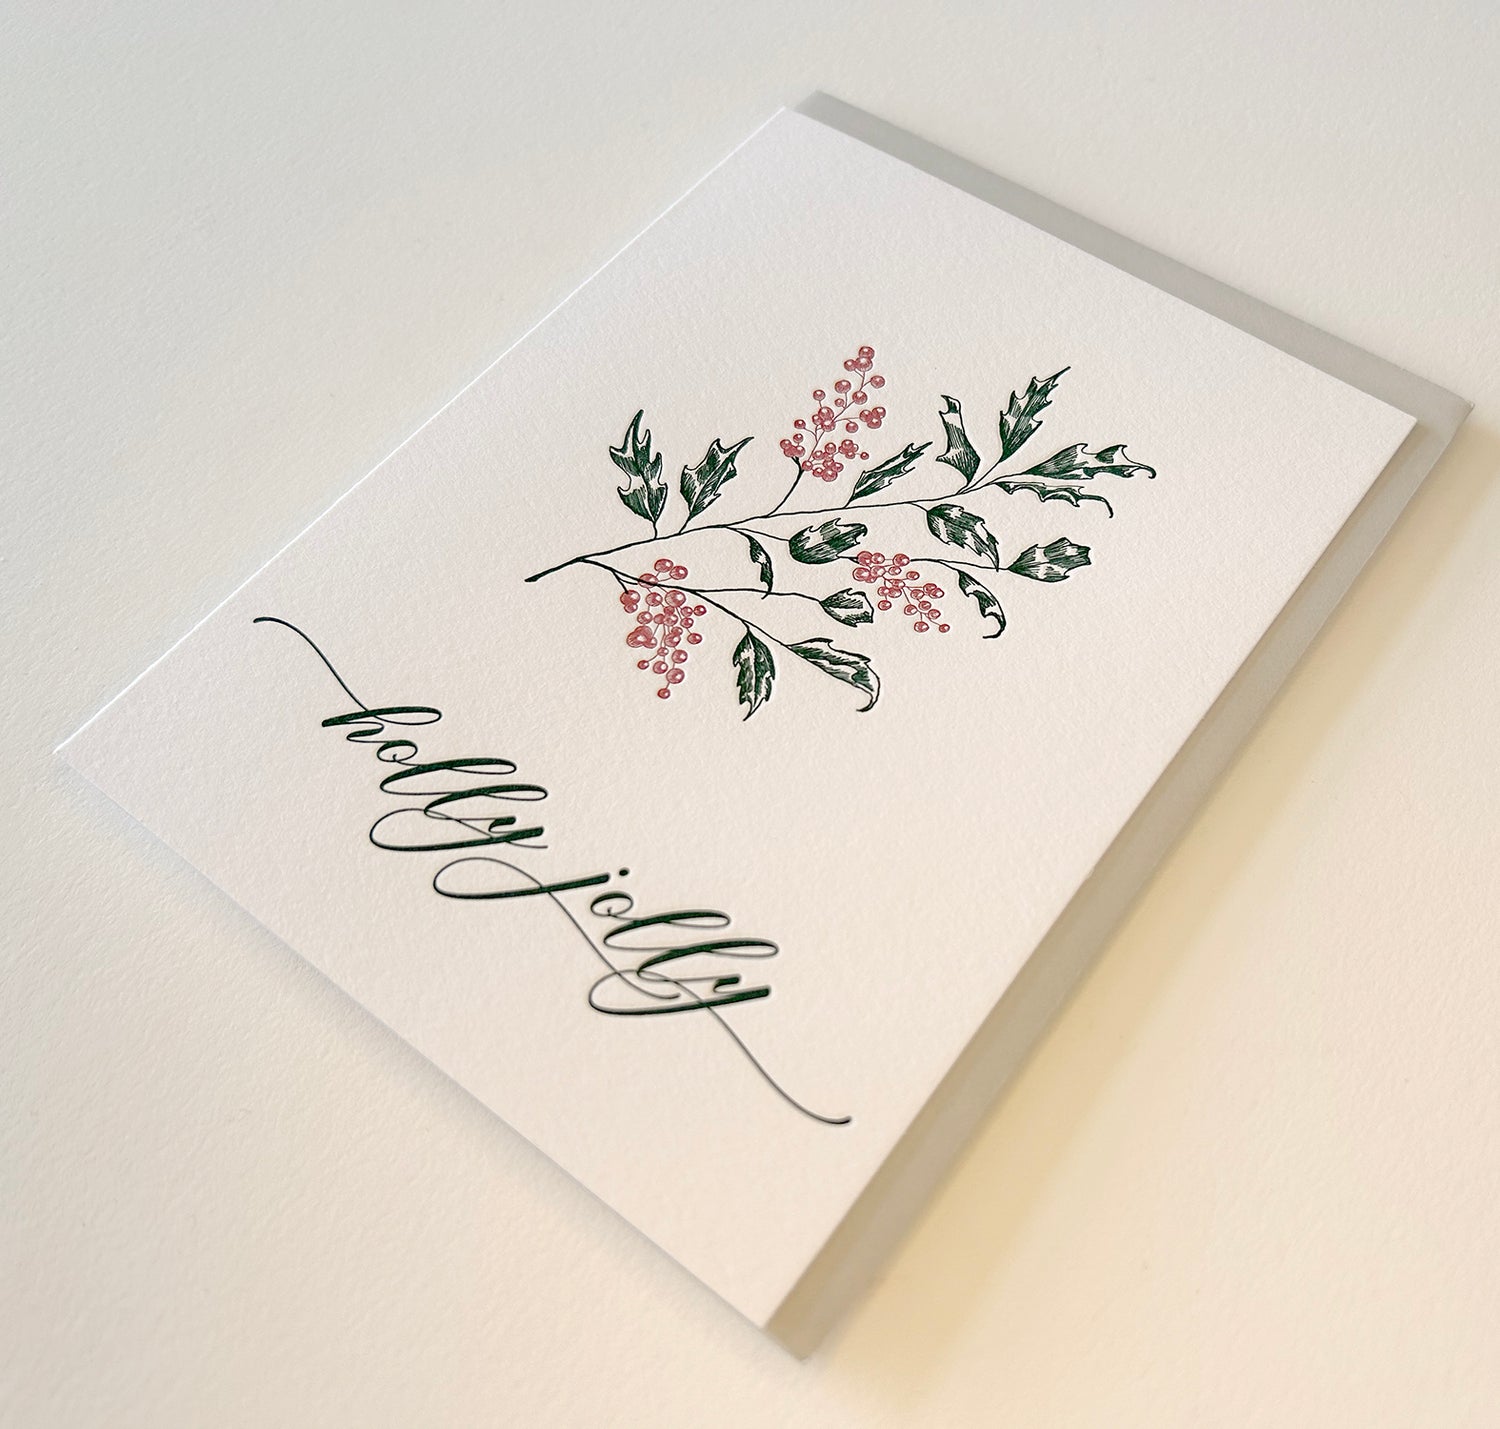 Letterpress holiday card with holly that says "holly jolly" by Rust Belt Love